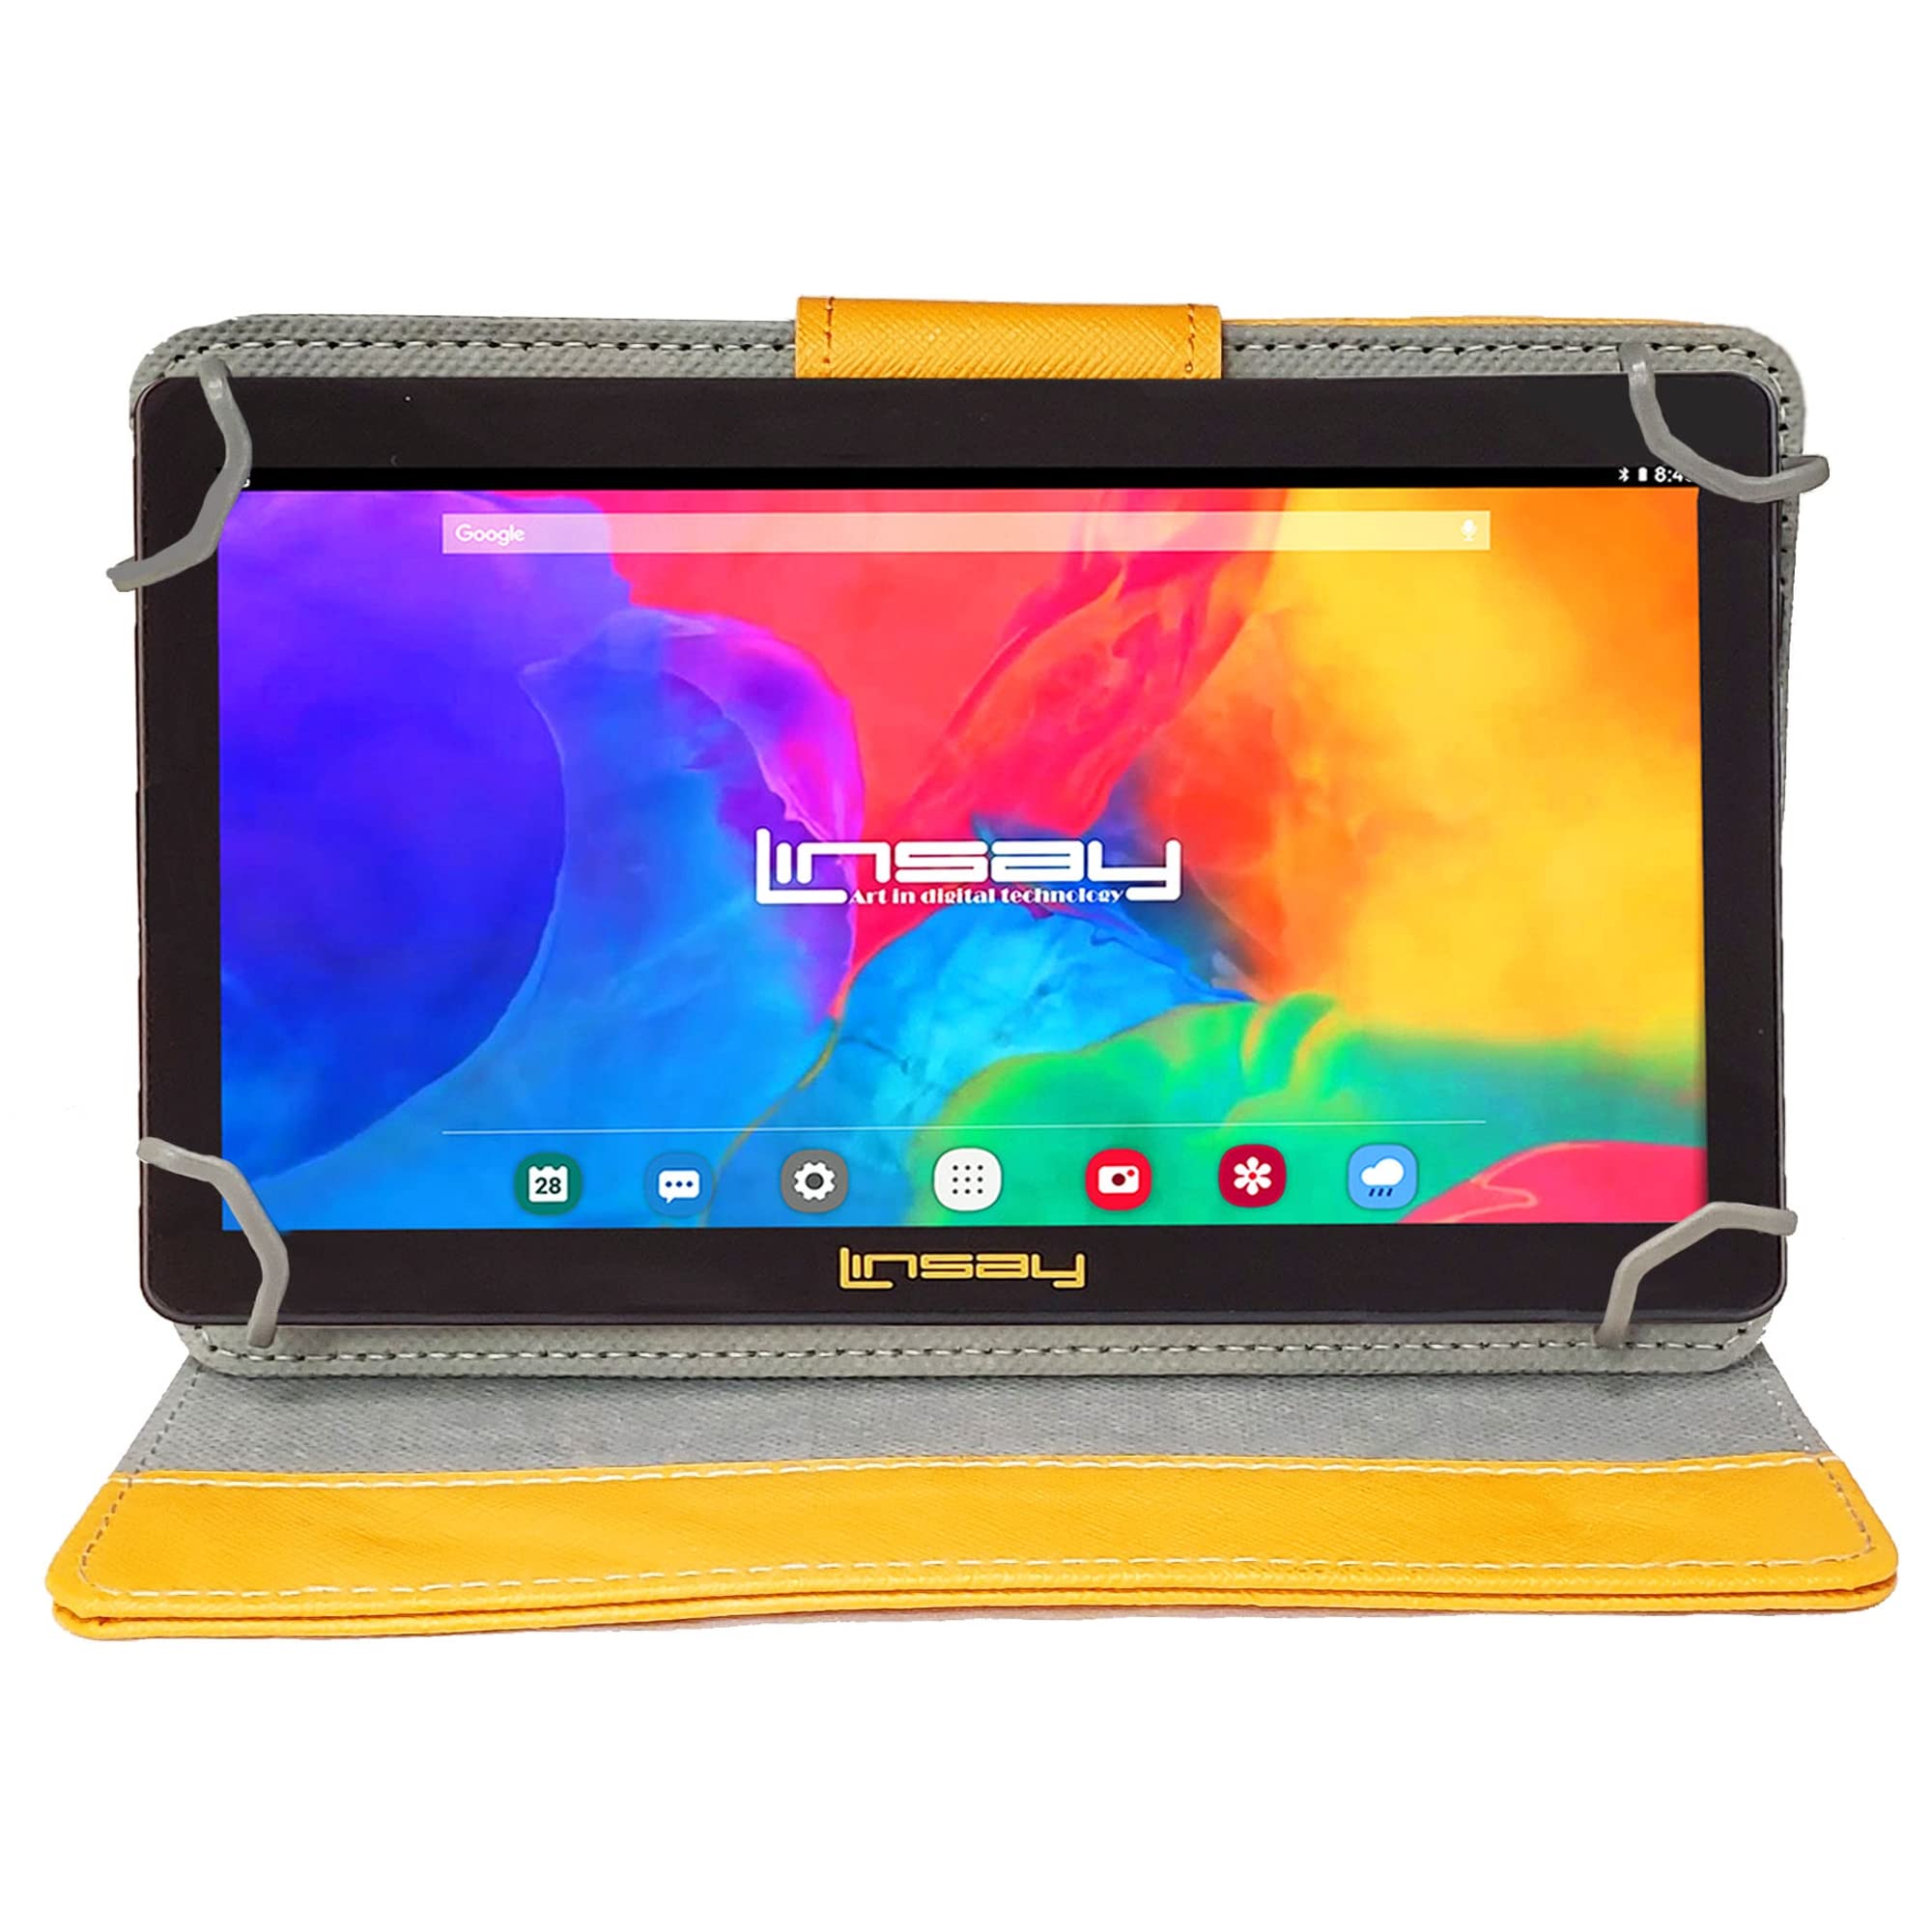 LINSAY 7" 2GB RAM 32GB Storage Android 12 Tablet with Orange Leather Case, Pop Holder and Pen Stylus